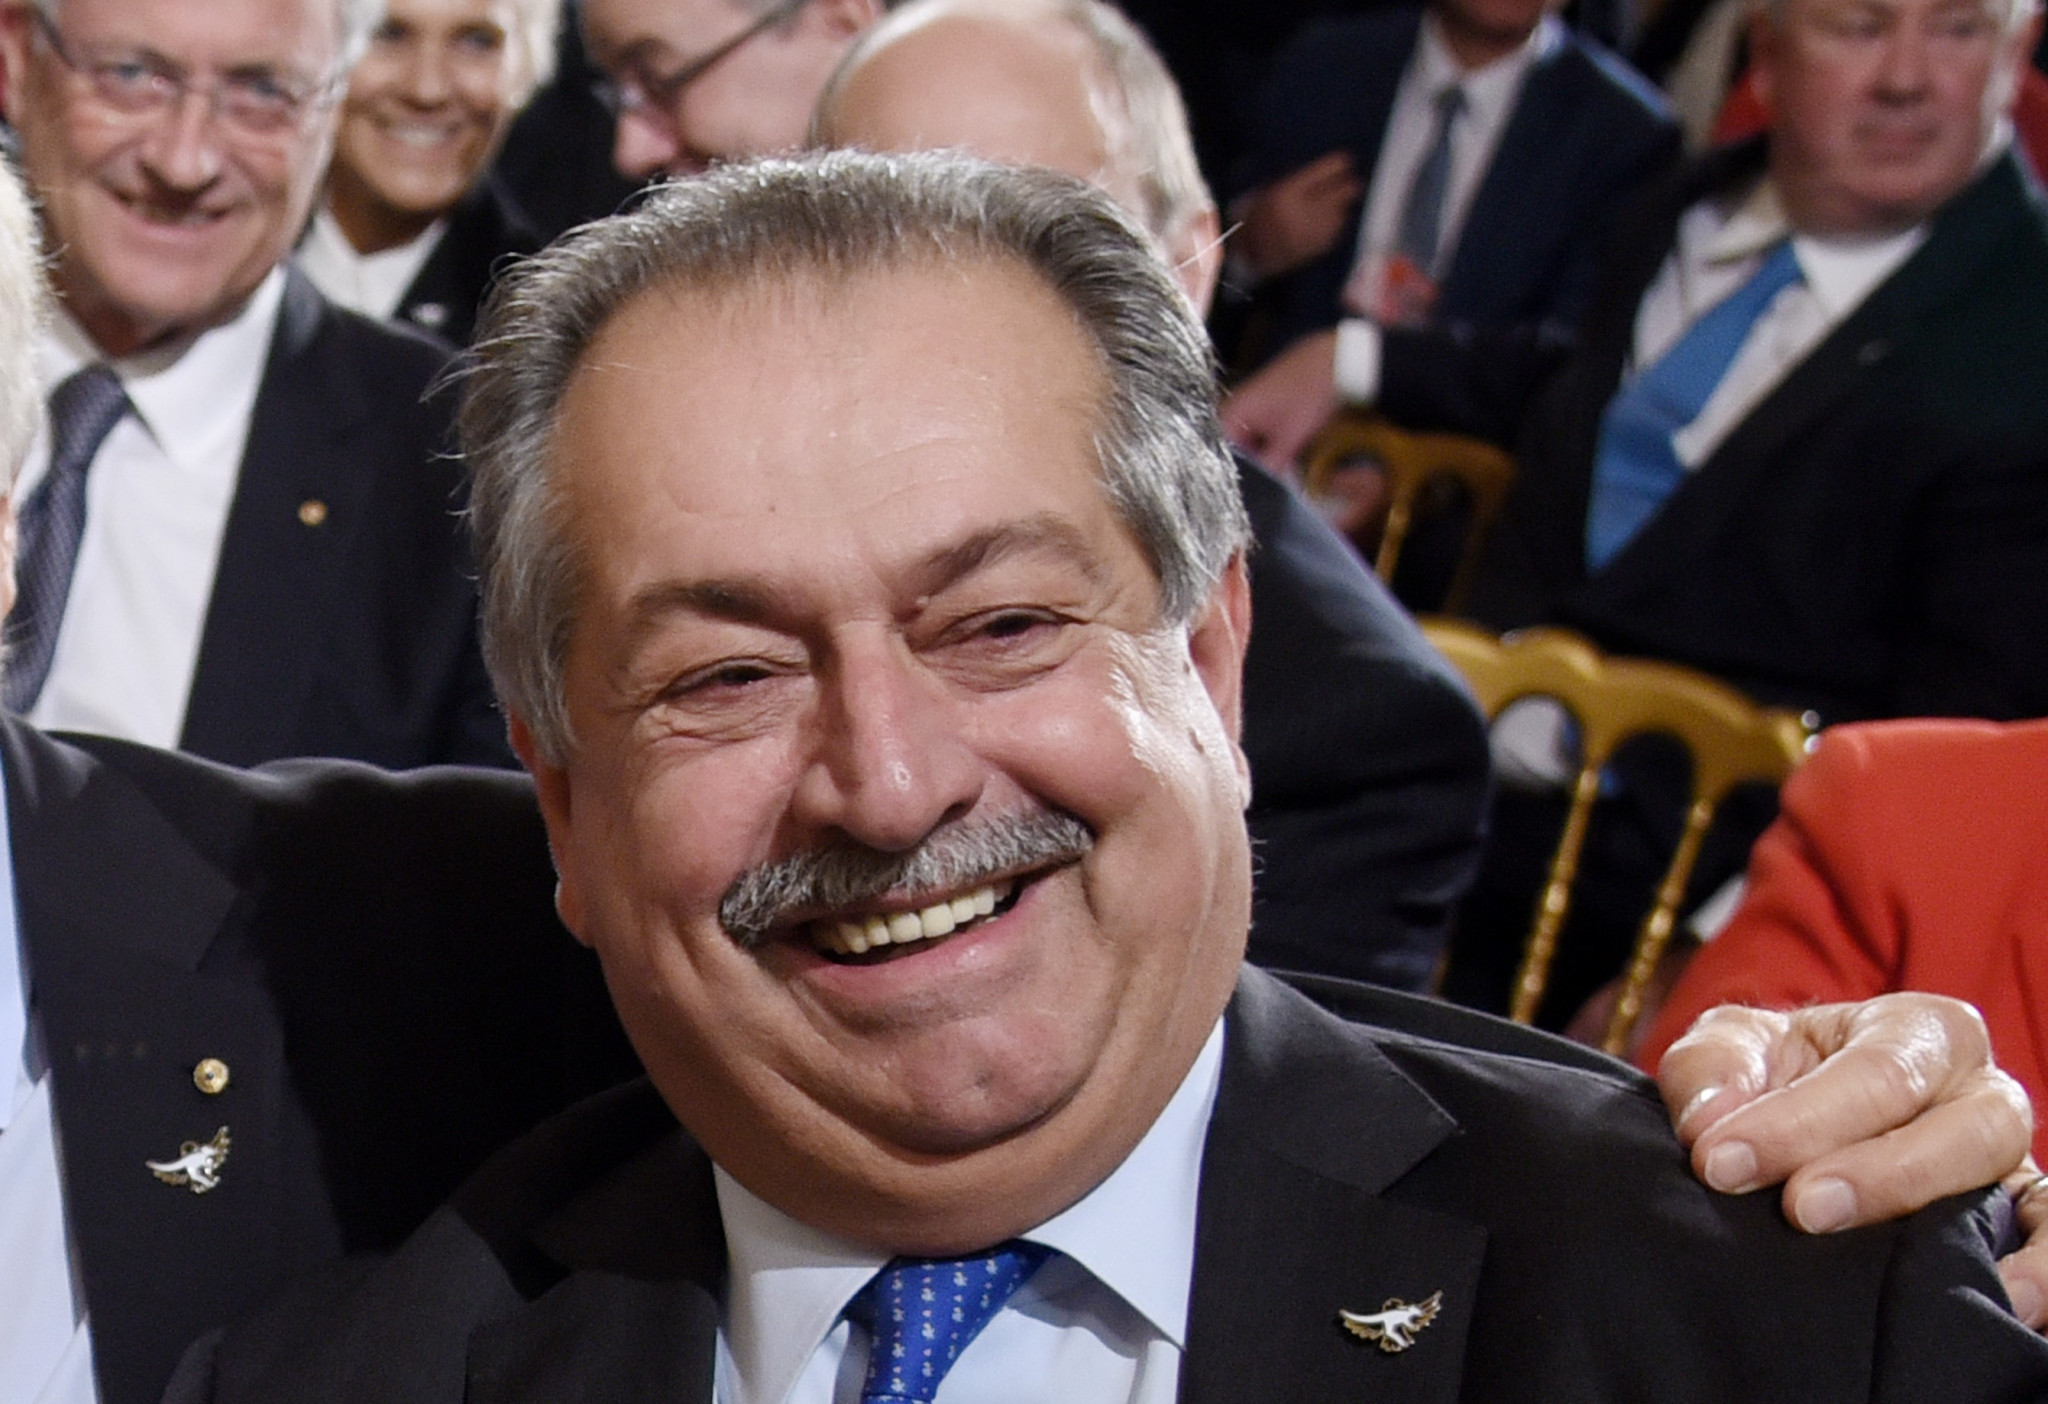 Brisbane 2032 President Andrew Liveris has vowed to ensure the Games are financially responsible ©Getty Images